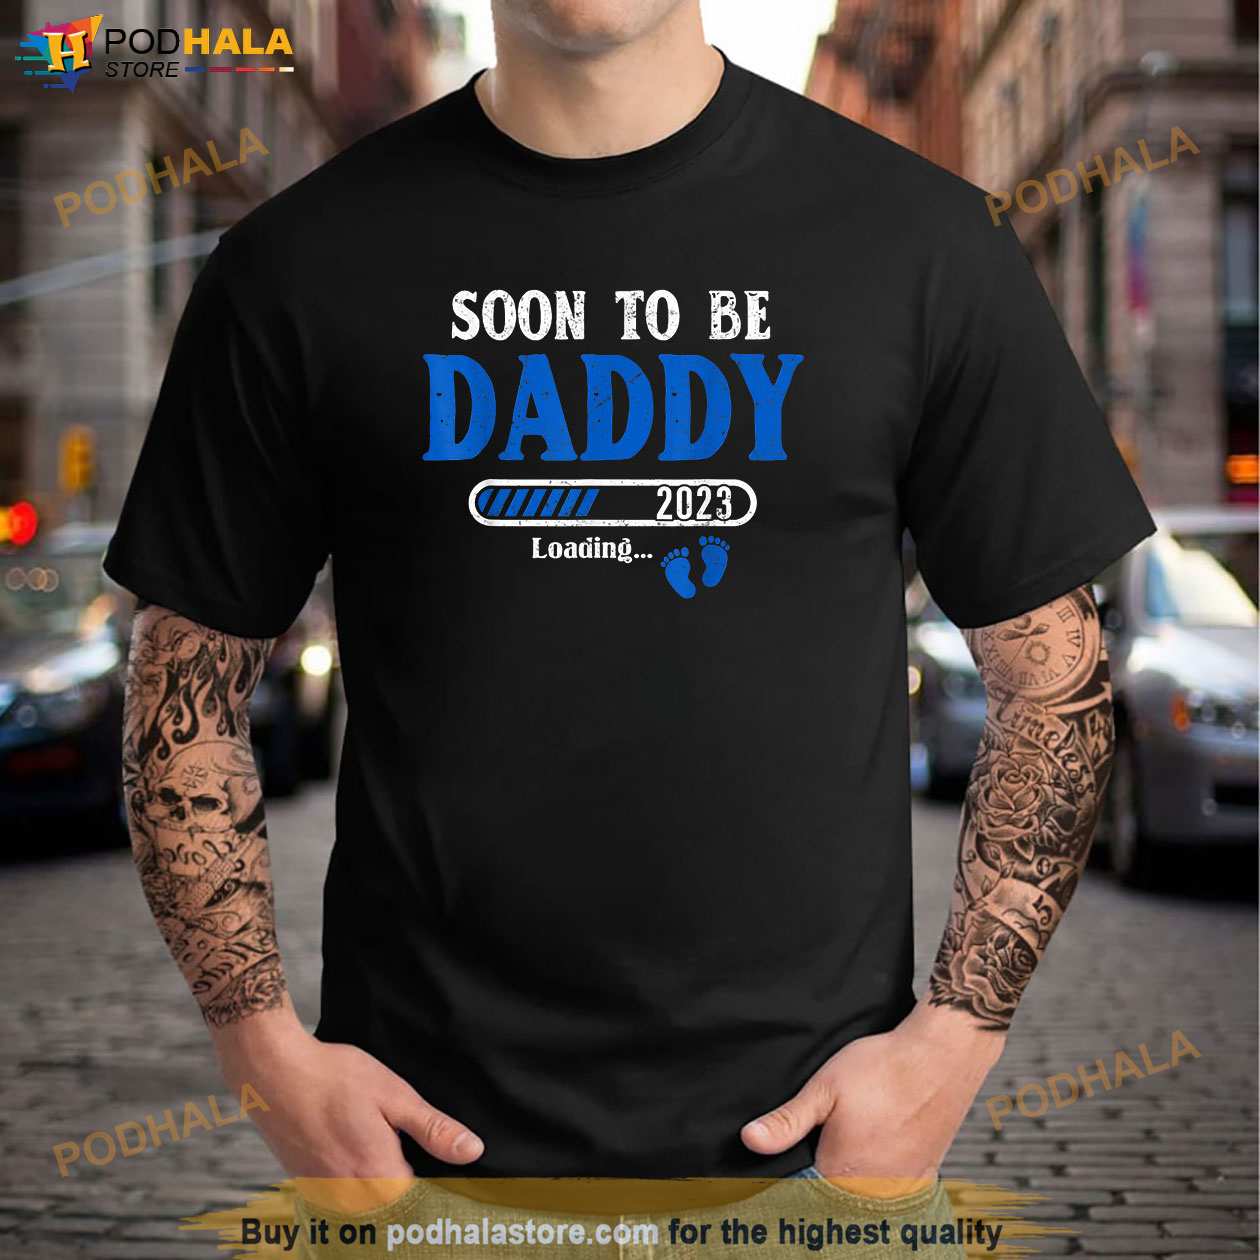 Soon To Be Daddy Est2023 New Dad Pregnancy Shirt, Gift Ideas For